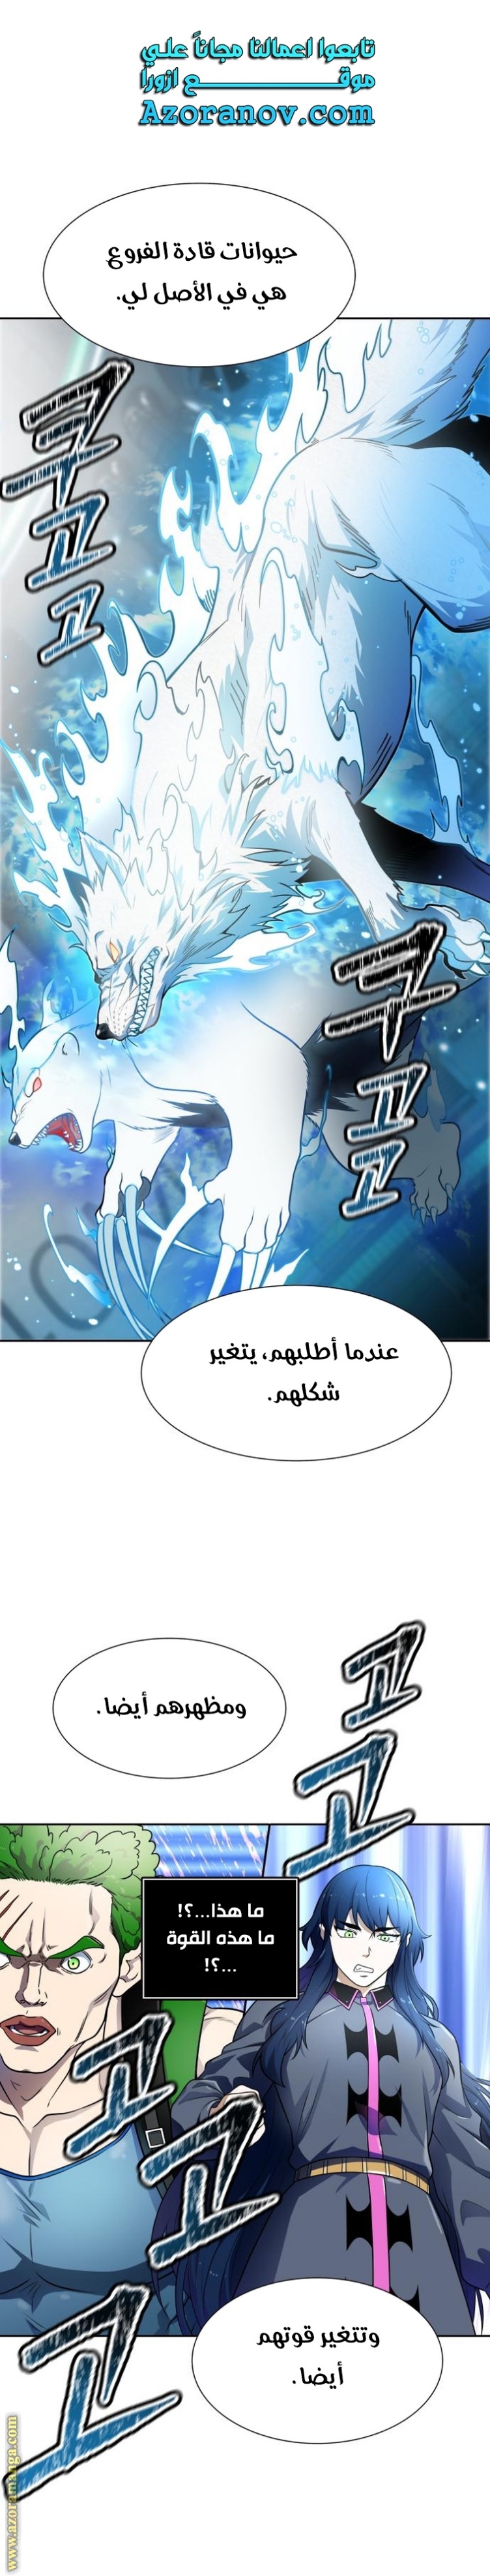 Tower of God S3: Chapter 158 - Page 1